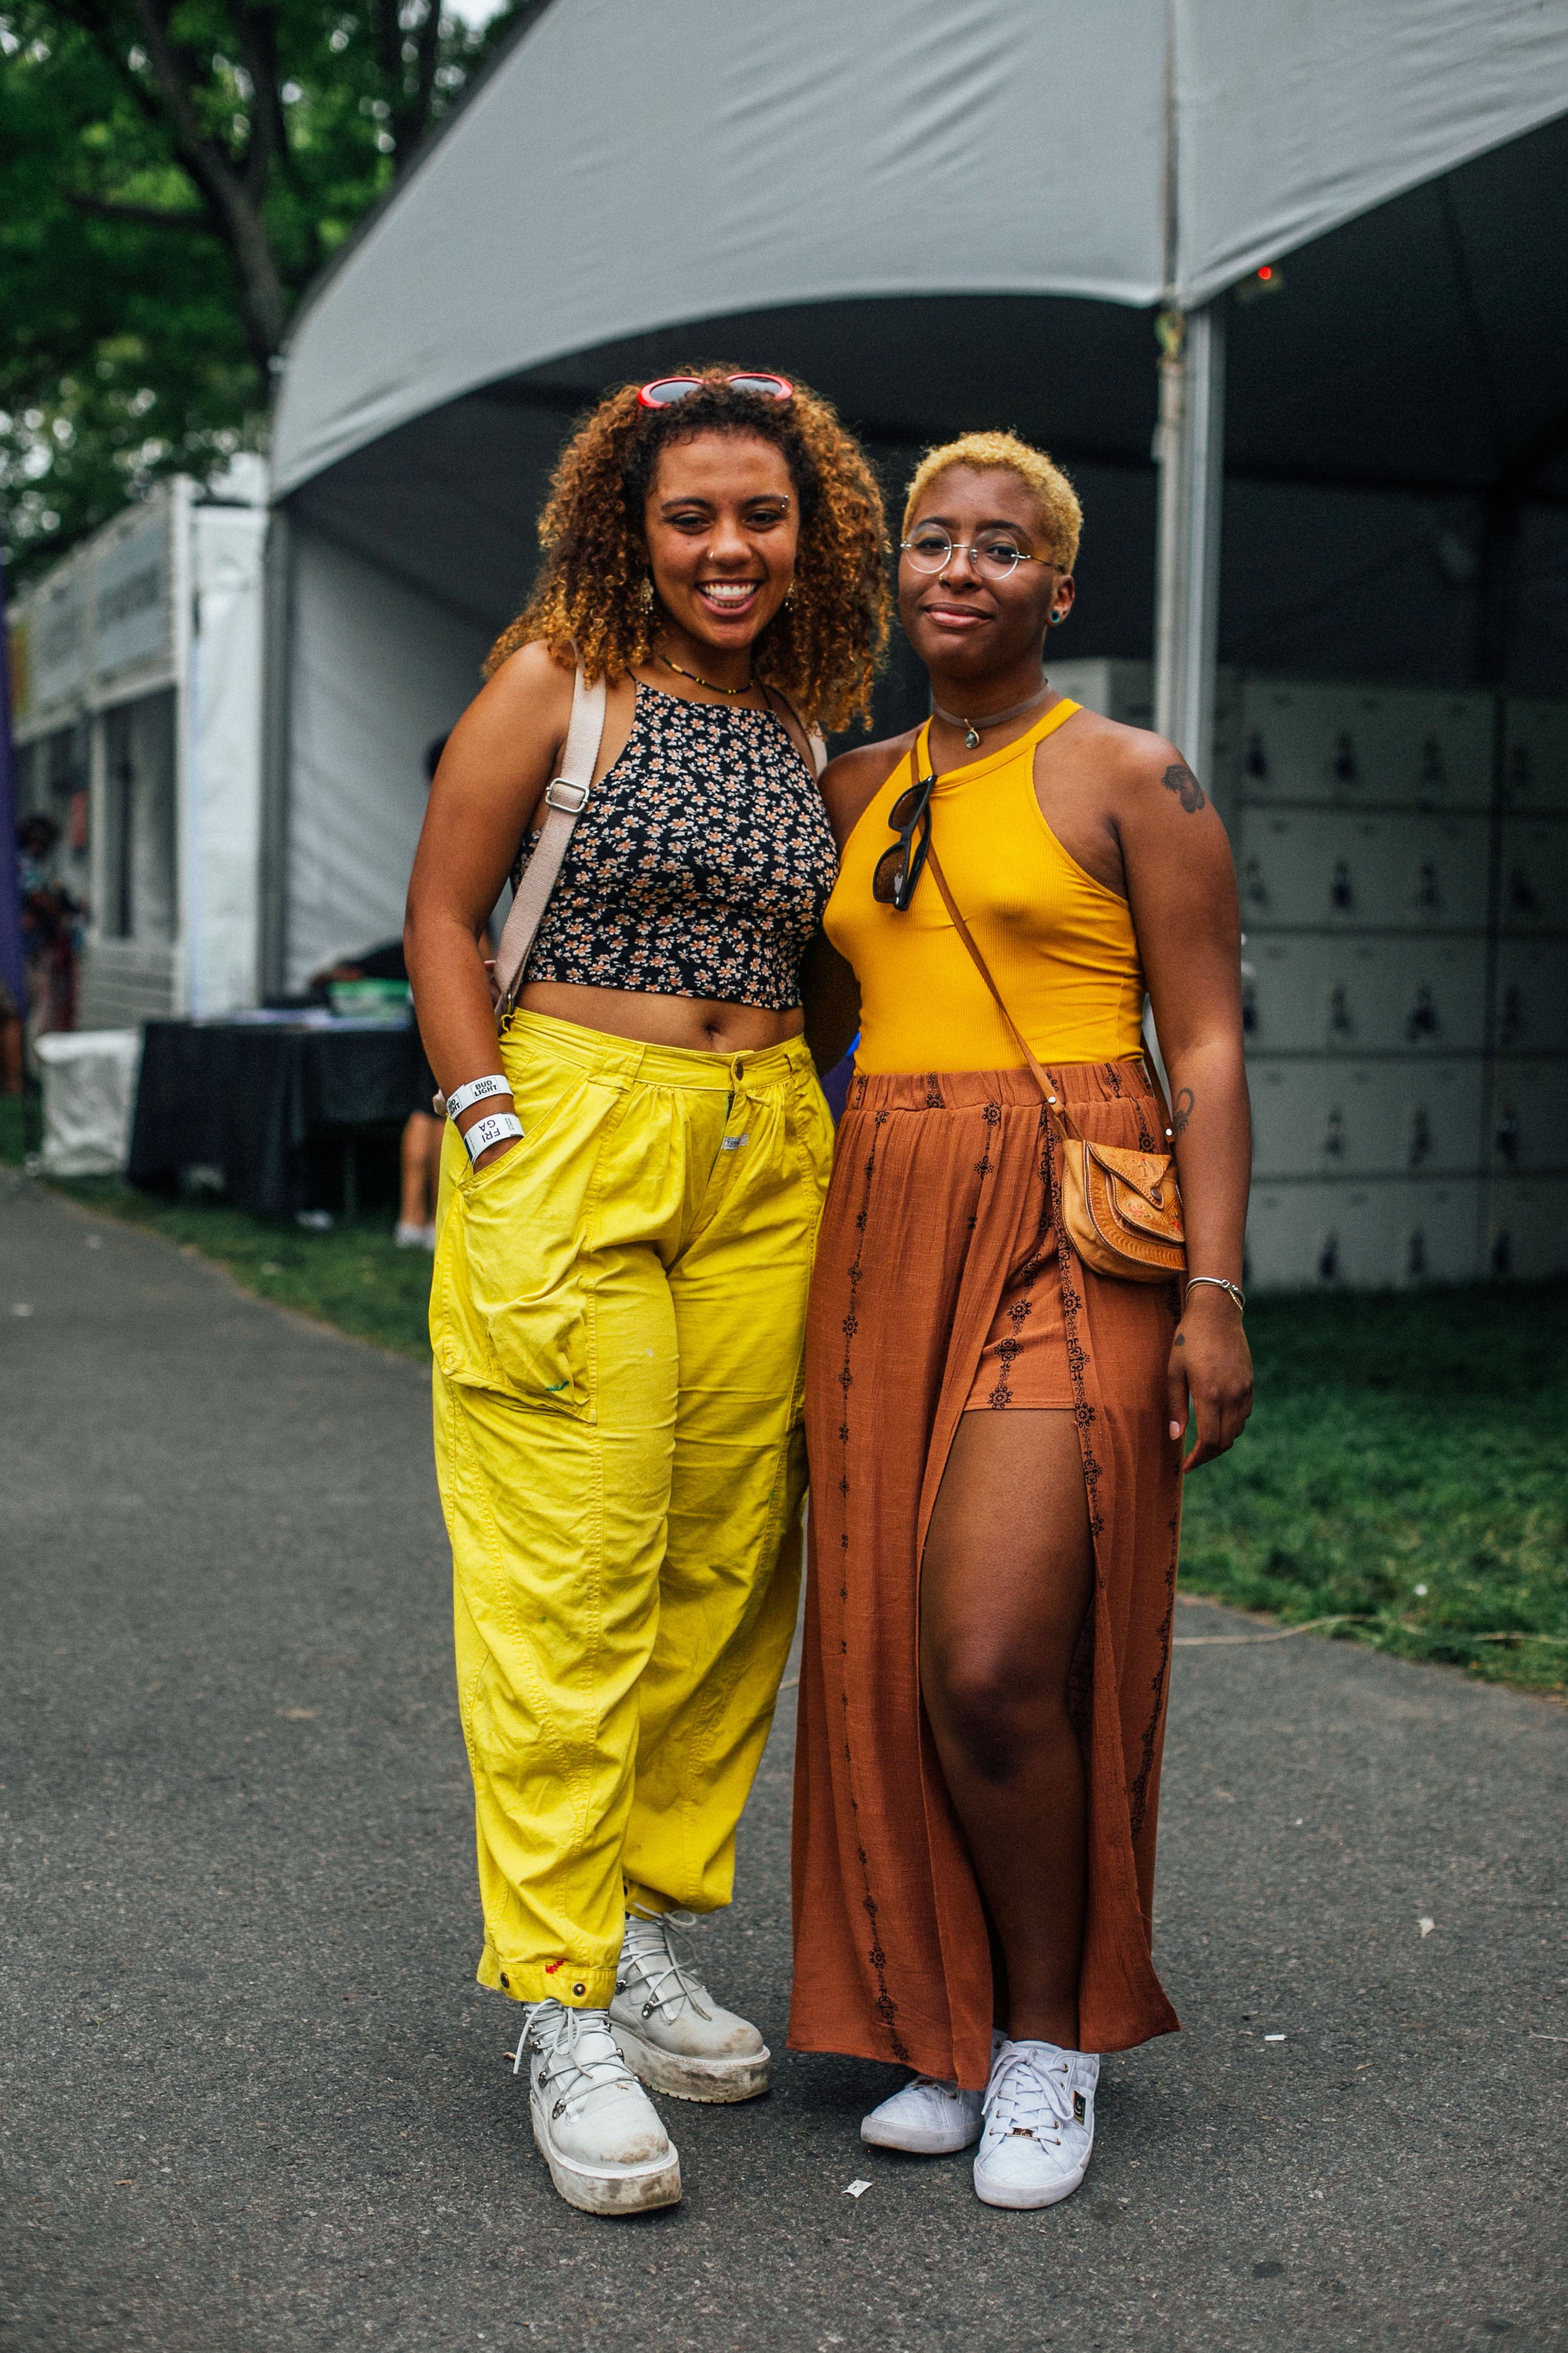 These Street Style Moments From the Panorama Music Fest are Next Level
